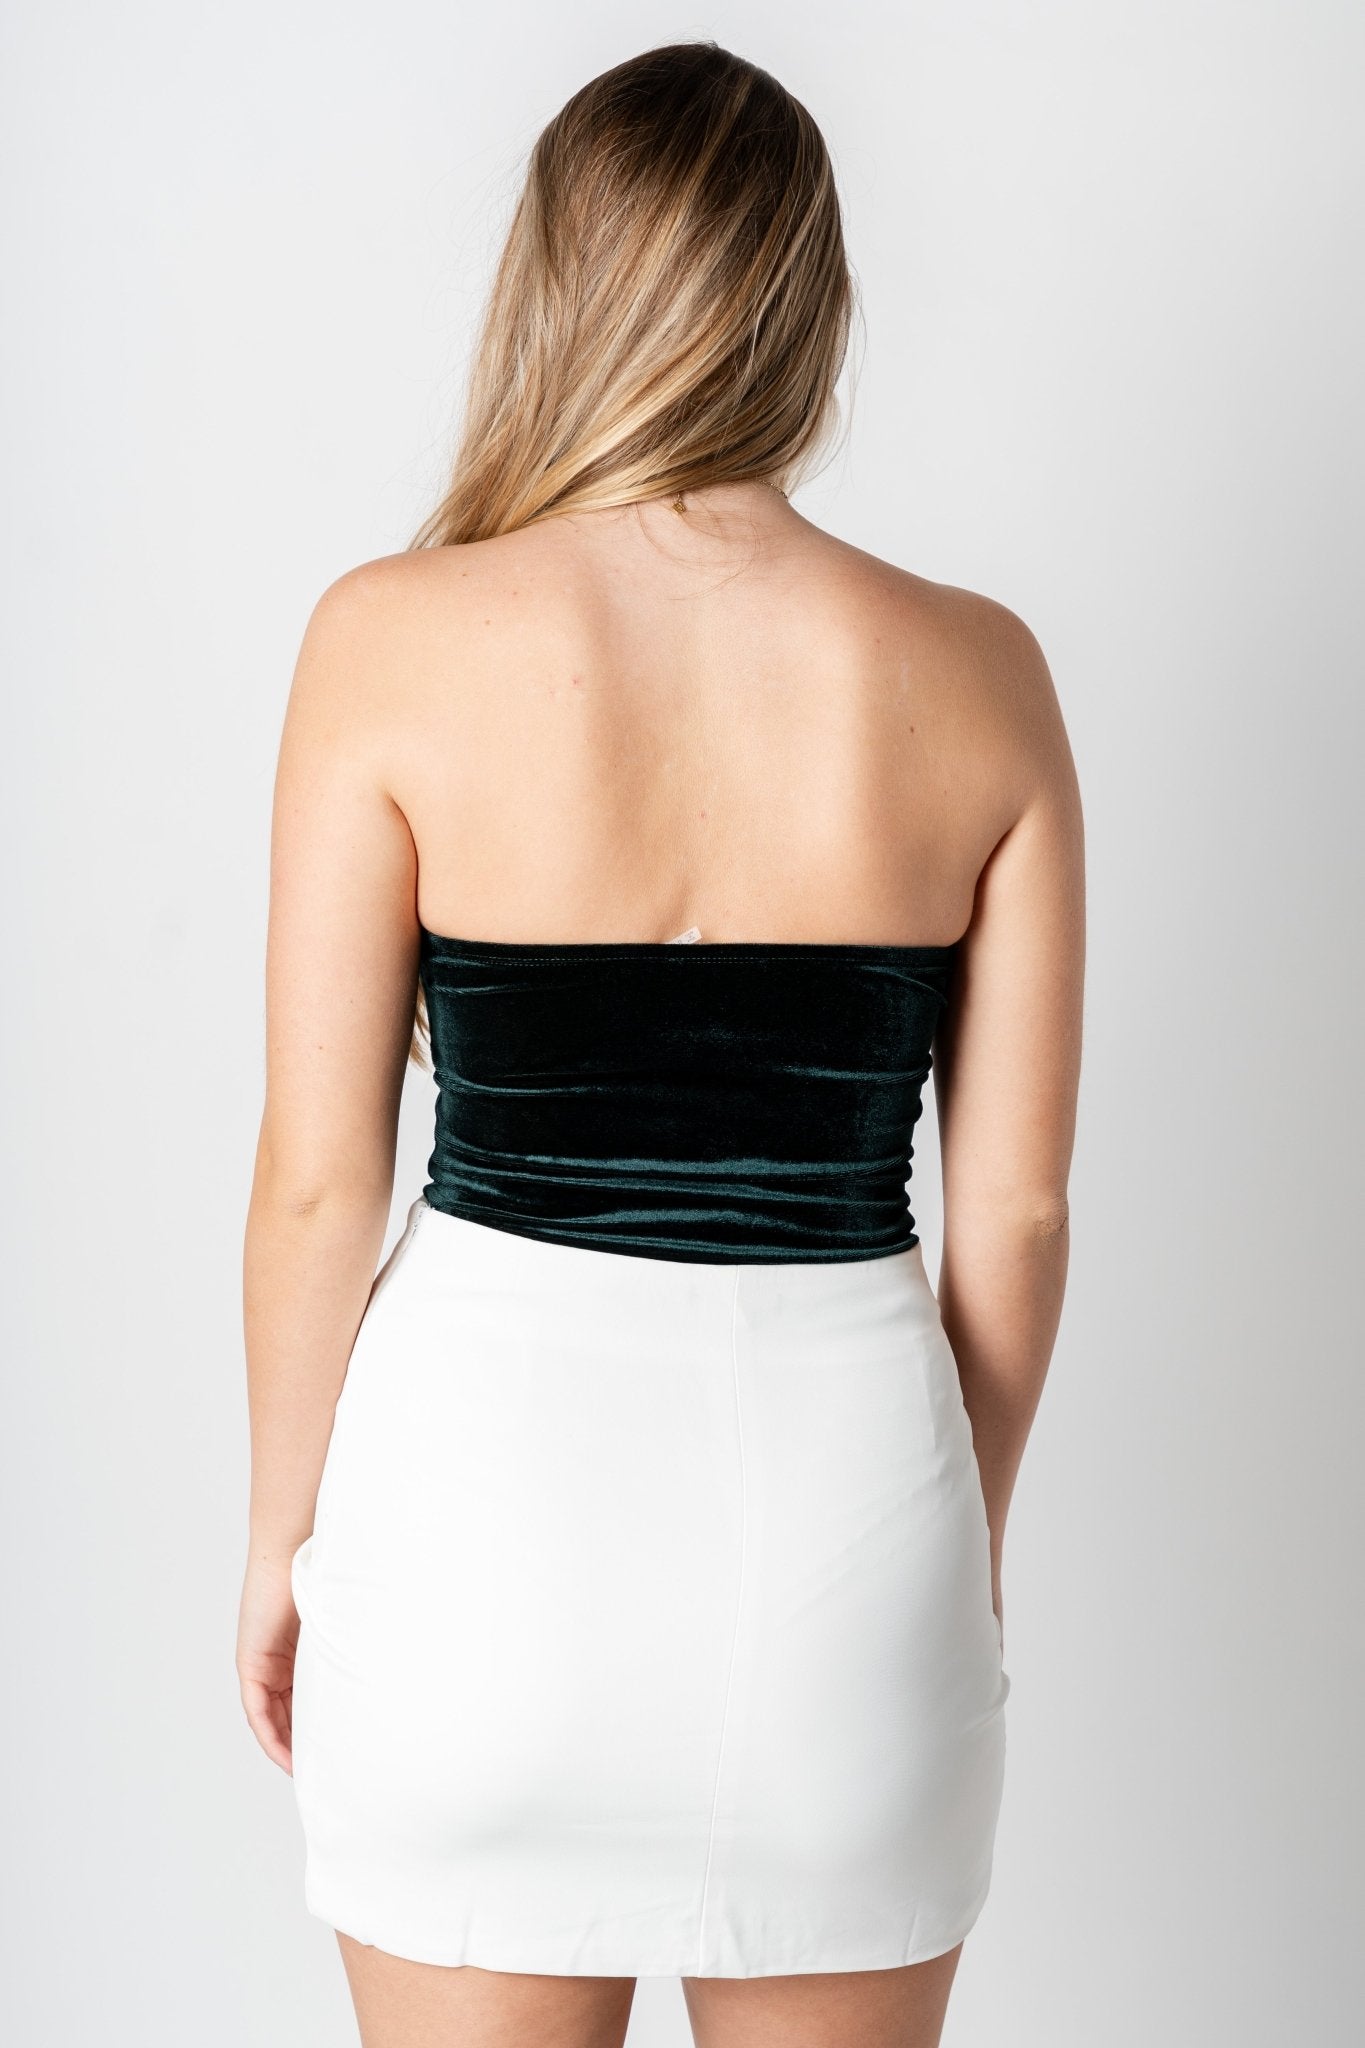 Strapless velvet bodysuit teal green - Affordable bodysuit - Boutique Bodysuits at Lush Fashion Lounge Boutique in Oklahoma City